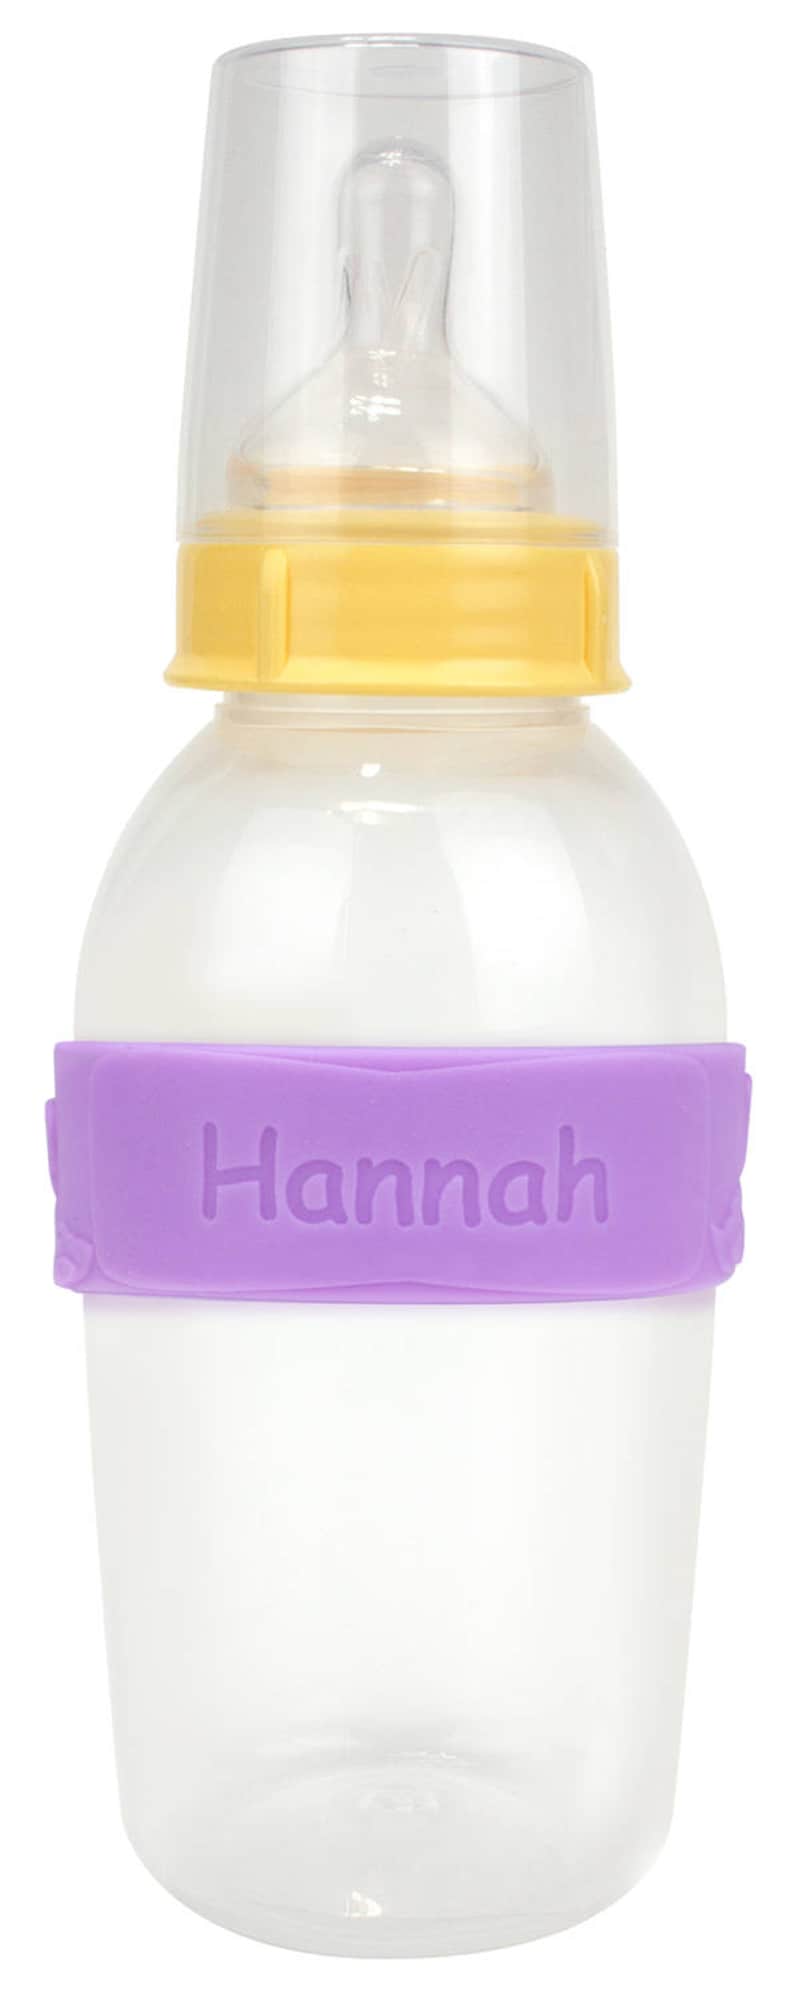 PACK of 3 Personalized Daycare Labels / Baby Bottle Labels / Sippy Cup Labels / Silicone Band Labels image 4